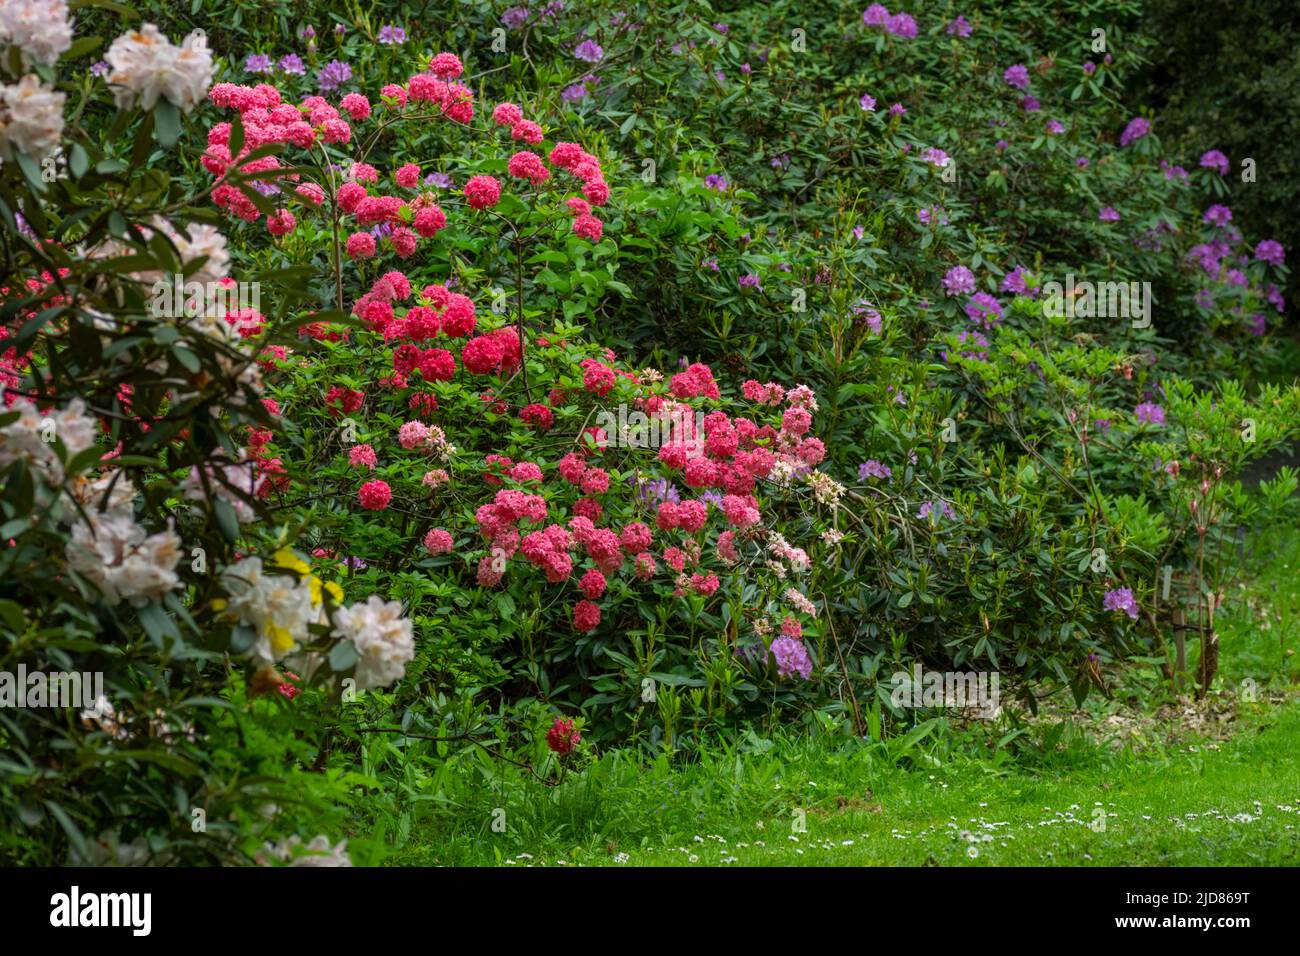 Rhododendron shrubs in full flower during the late spring. These beautiful flowers in a  variety of colors are a joy to see Stock Photo